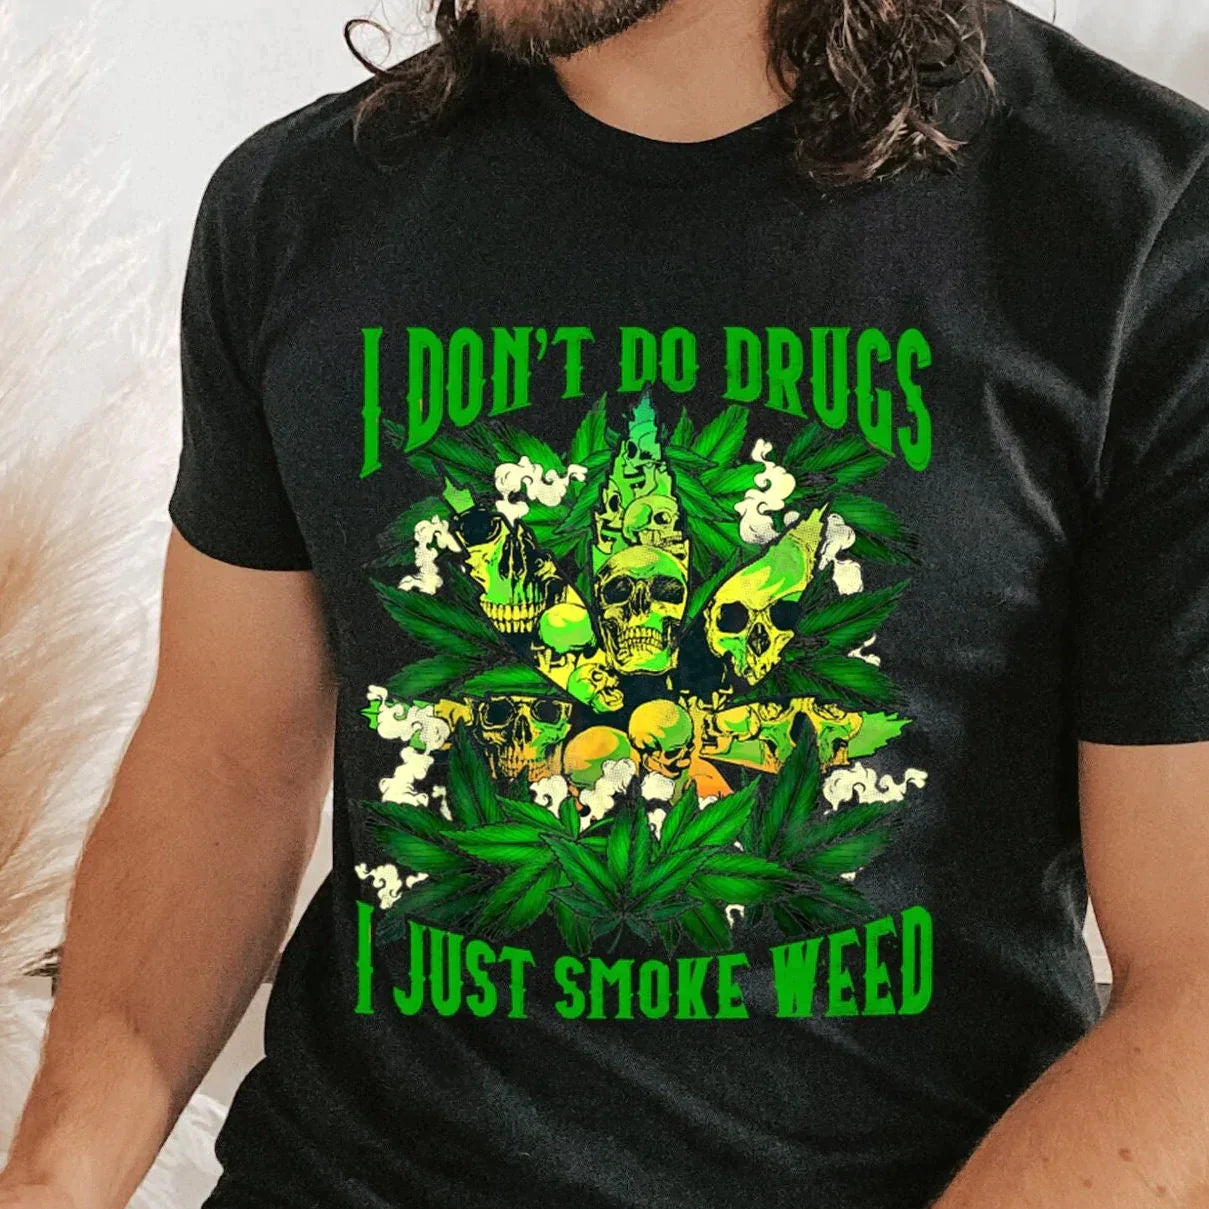 Funny Stoner Shirt | Hippie Clothes, Marijuana Gift, Stoner Gifts for Him, Weed Shirt, 420 Gifts, Gift for Stoner Men, 420gifts for Women HMDesignStudioUS